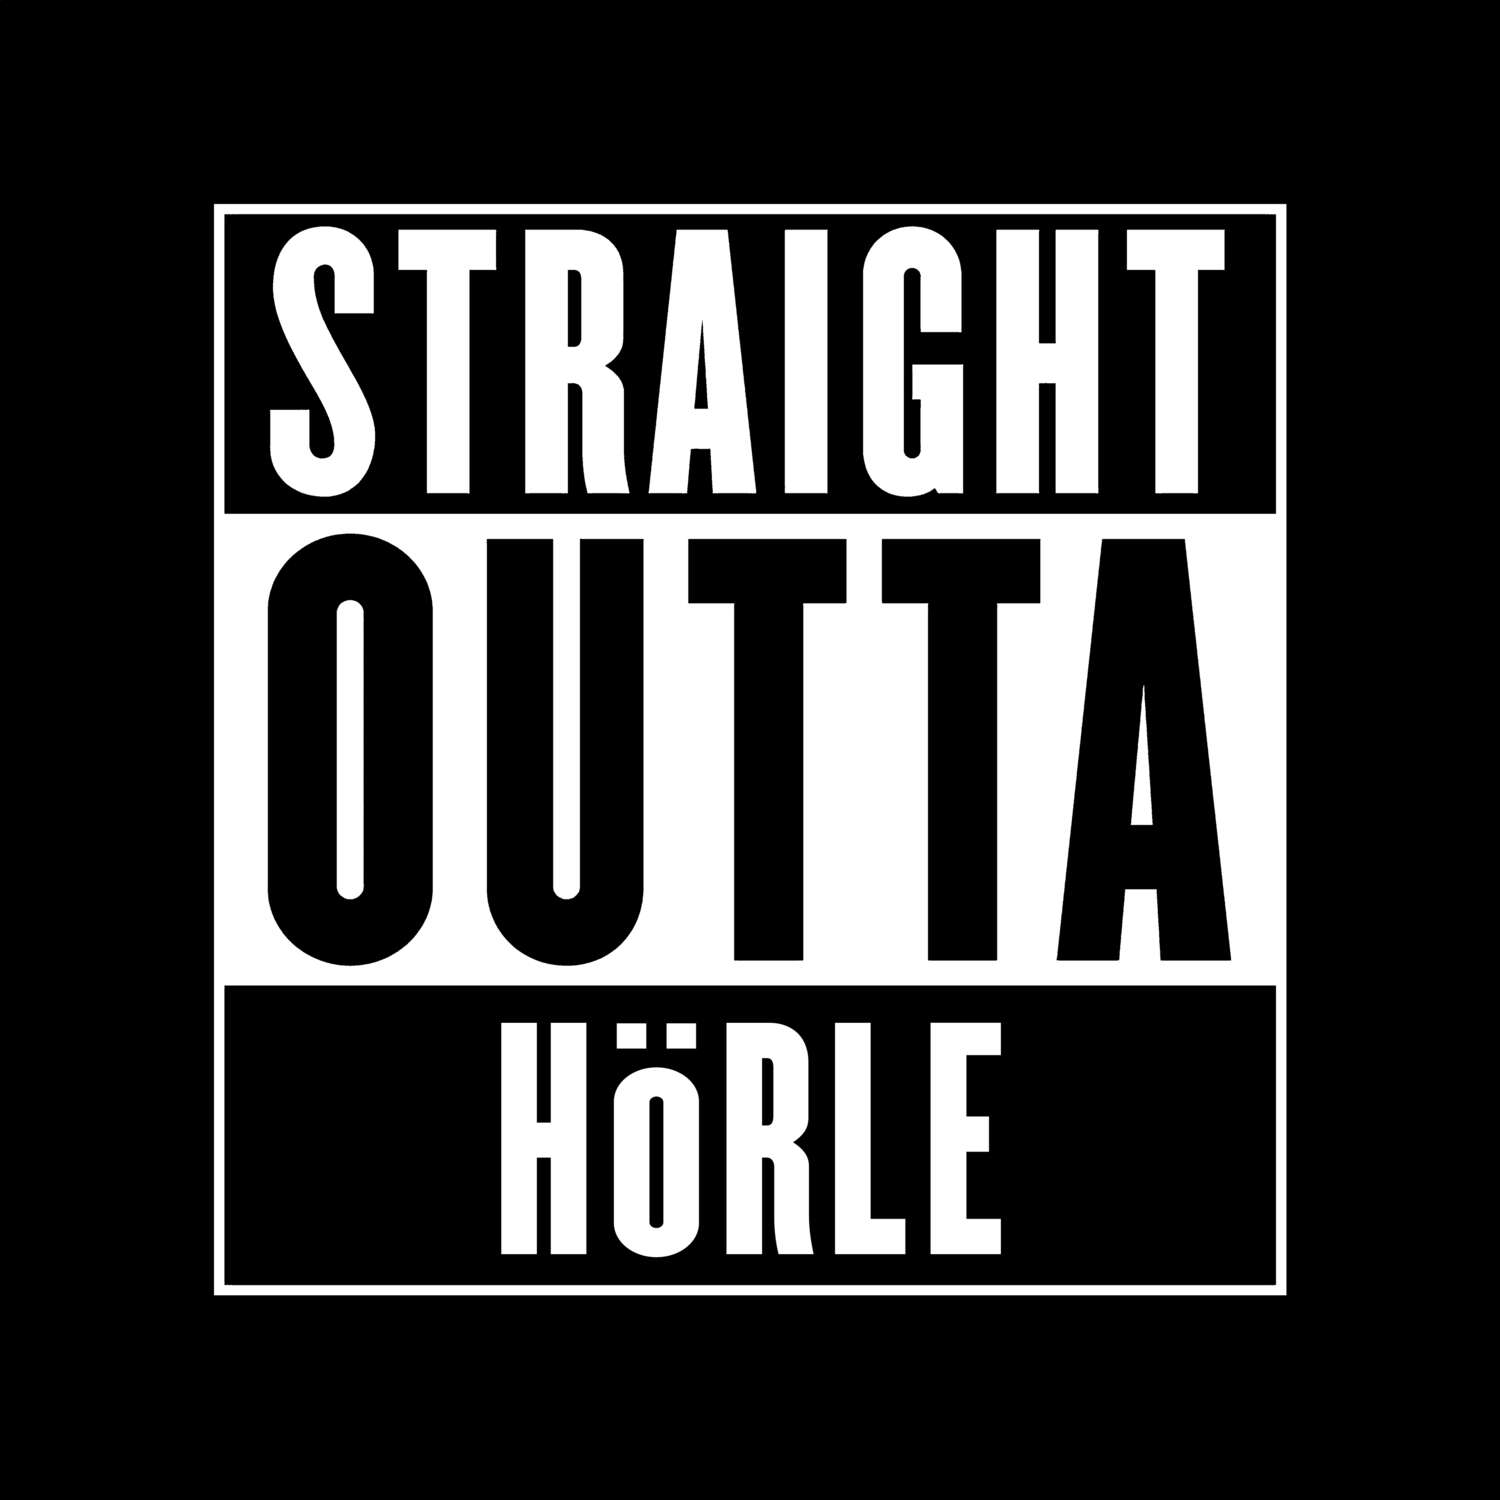 Hörle T-Shirt »Straight Outta«